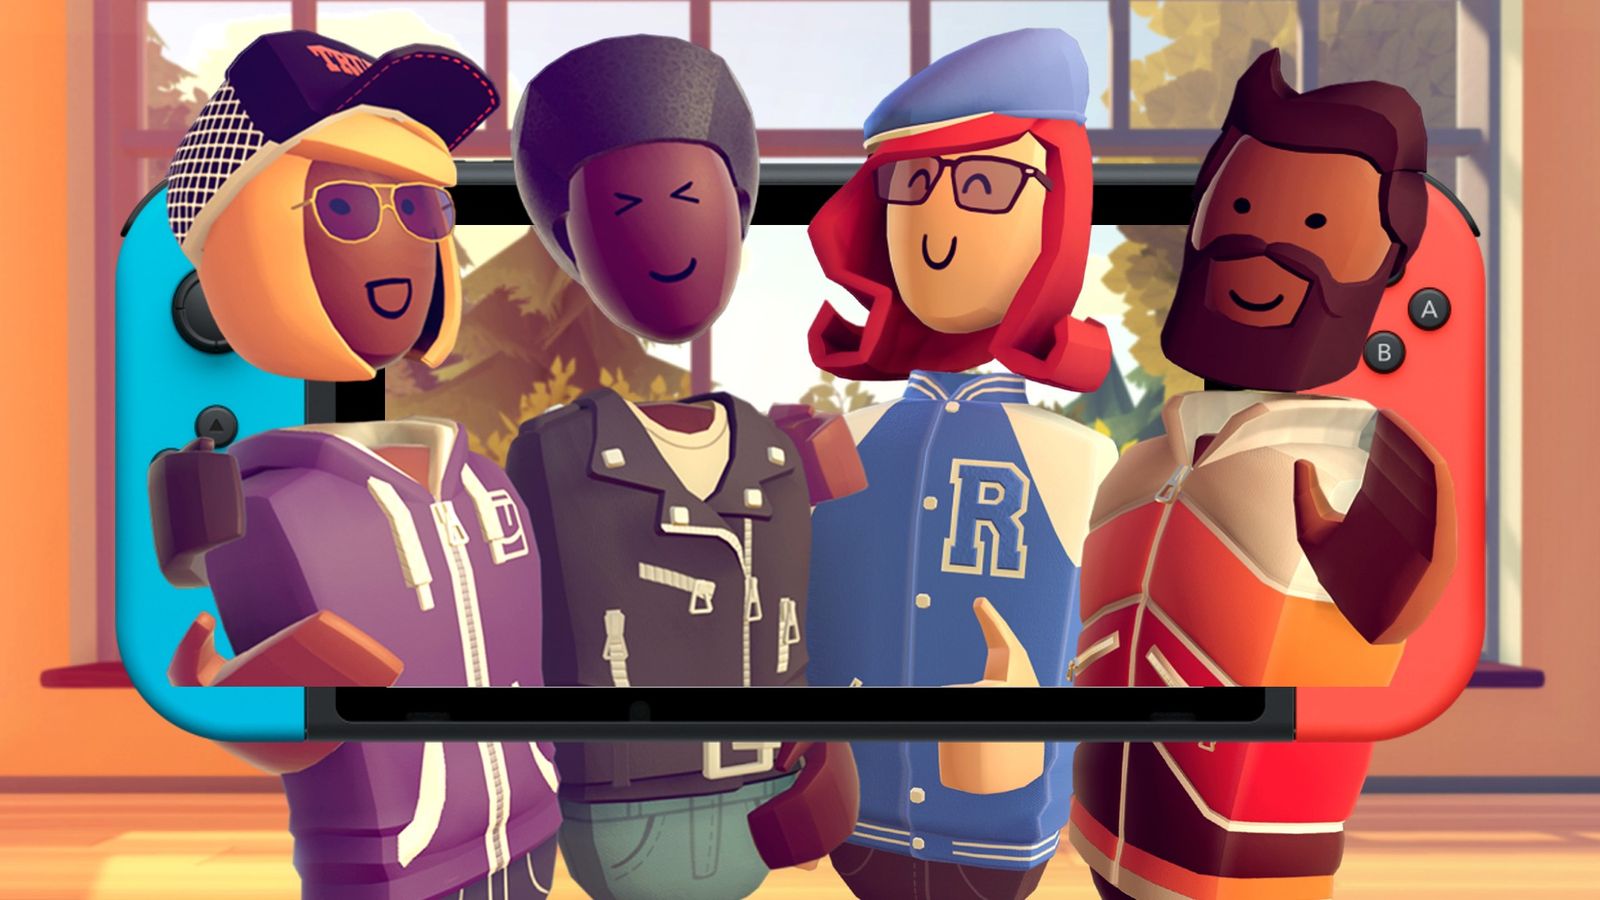 A group of Rec Room avatars standing together inside a Nintendo Switch console